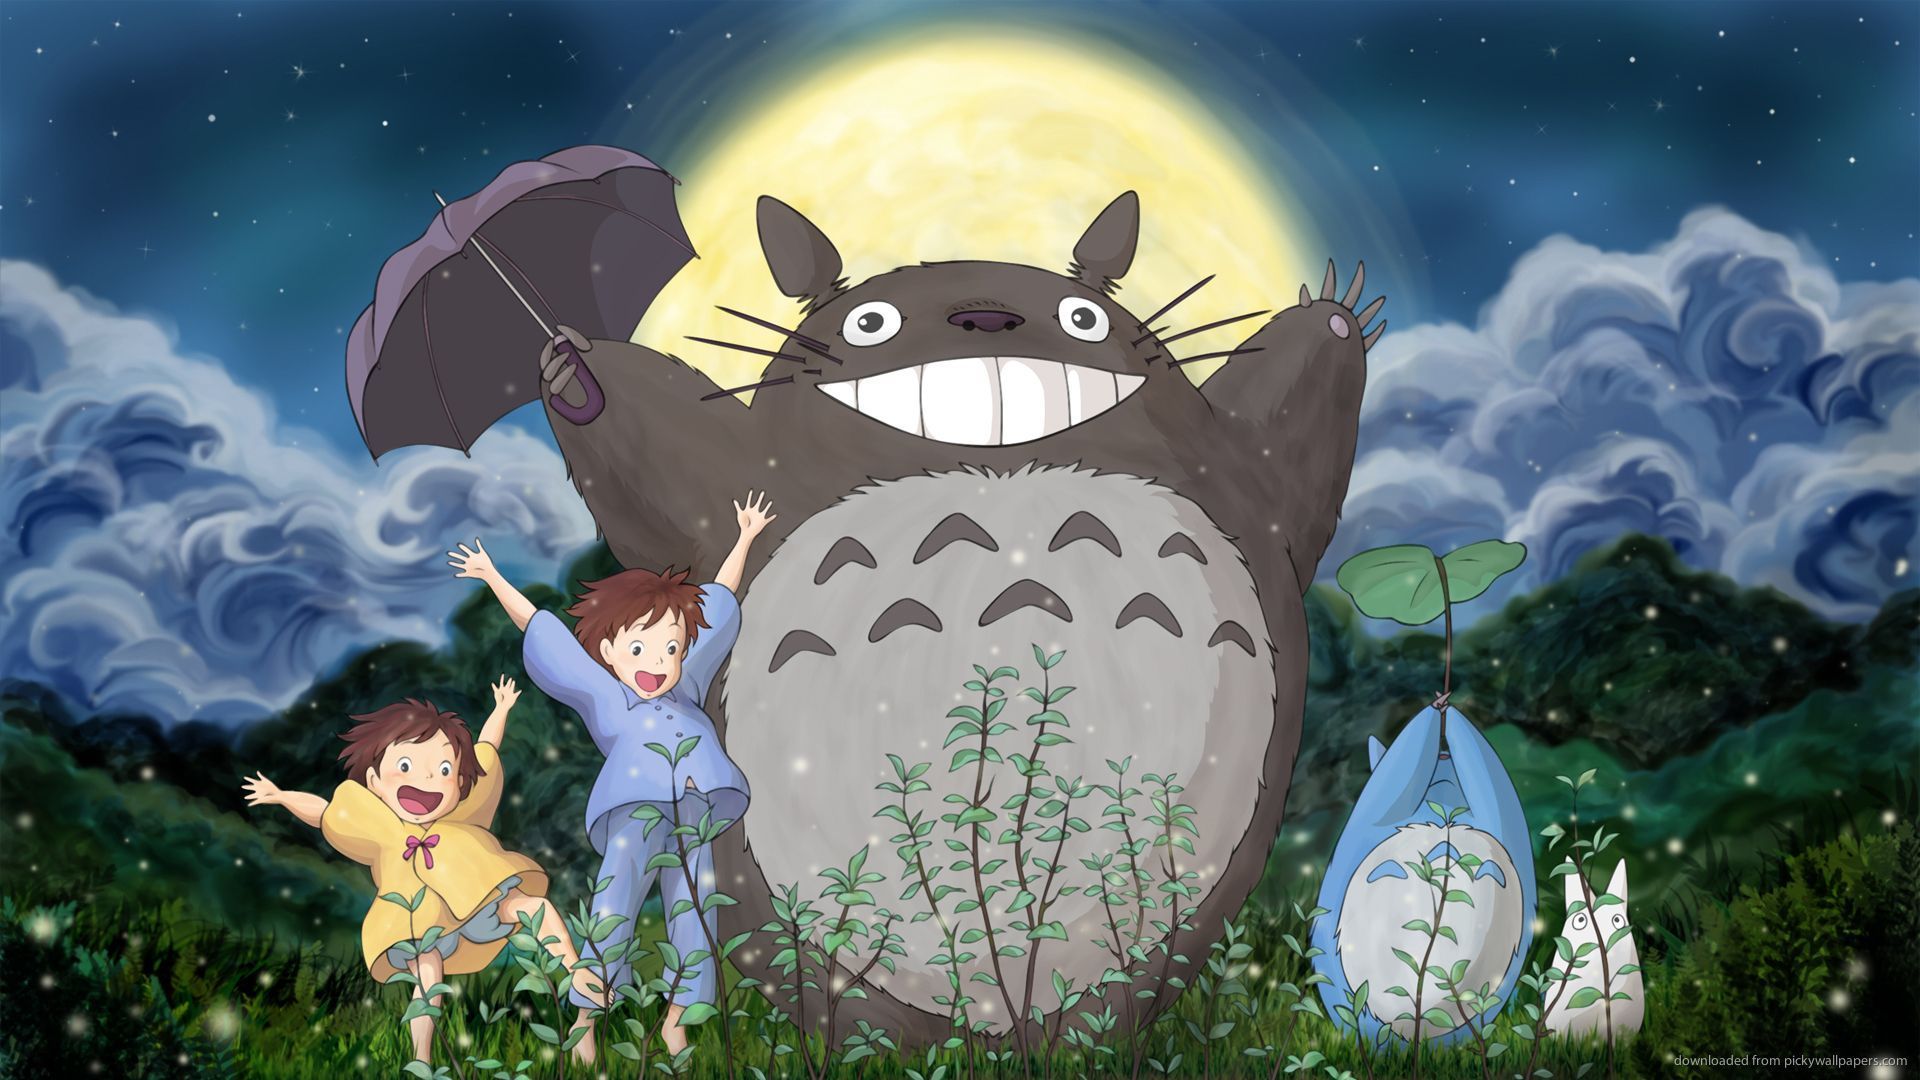 Download 1920x1080 My Neighbor Totoro Awesome Wallpaper